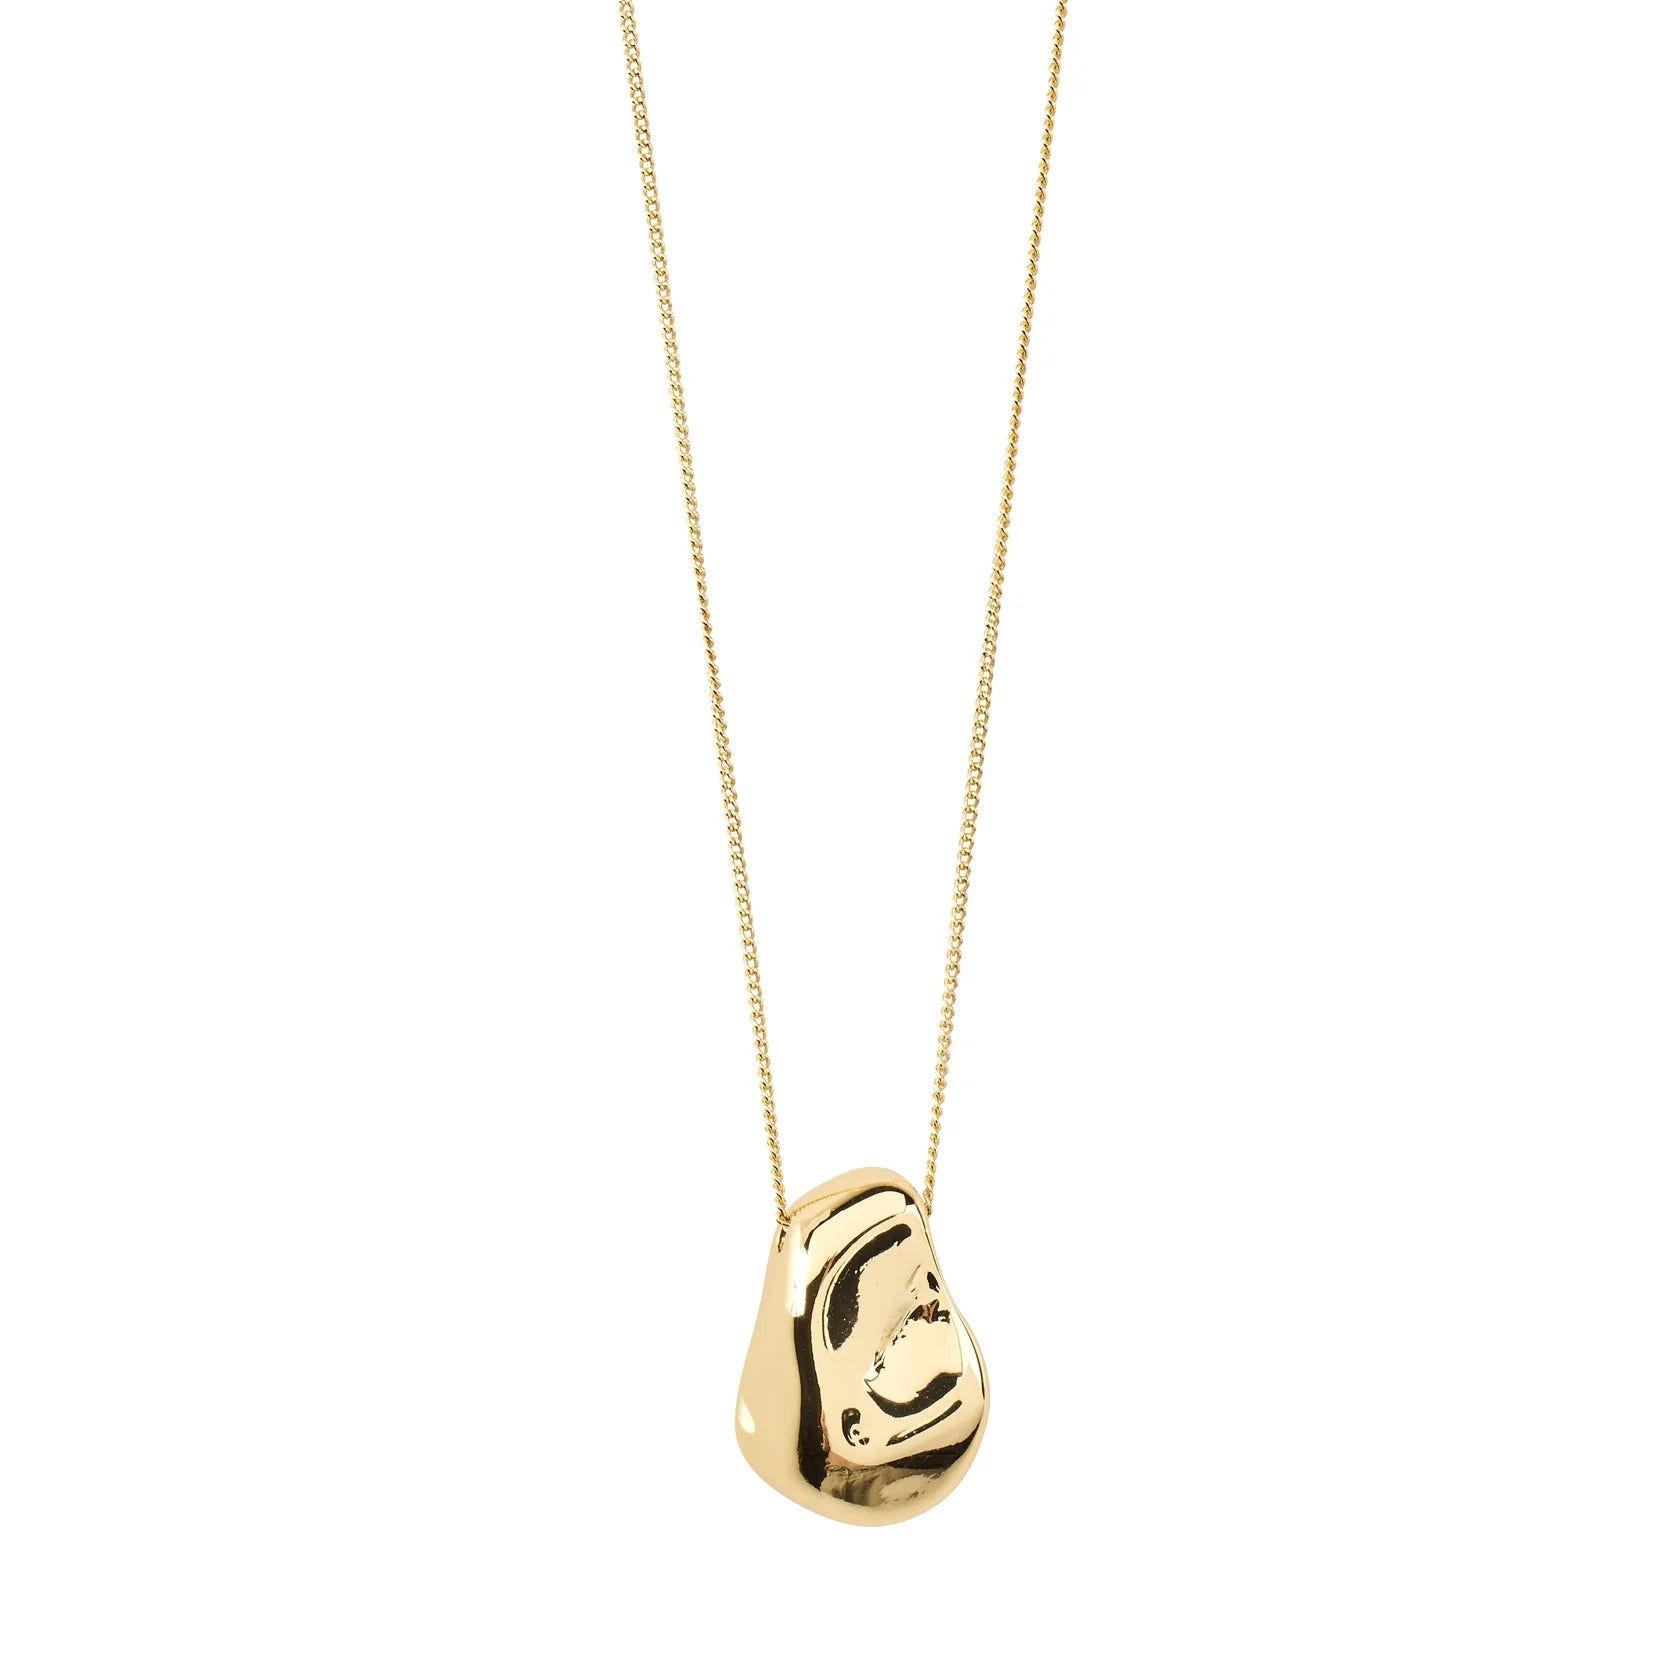 PILGRIM CHANTAL NECKLACE GOLD PLATED